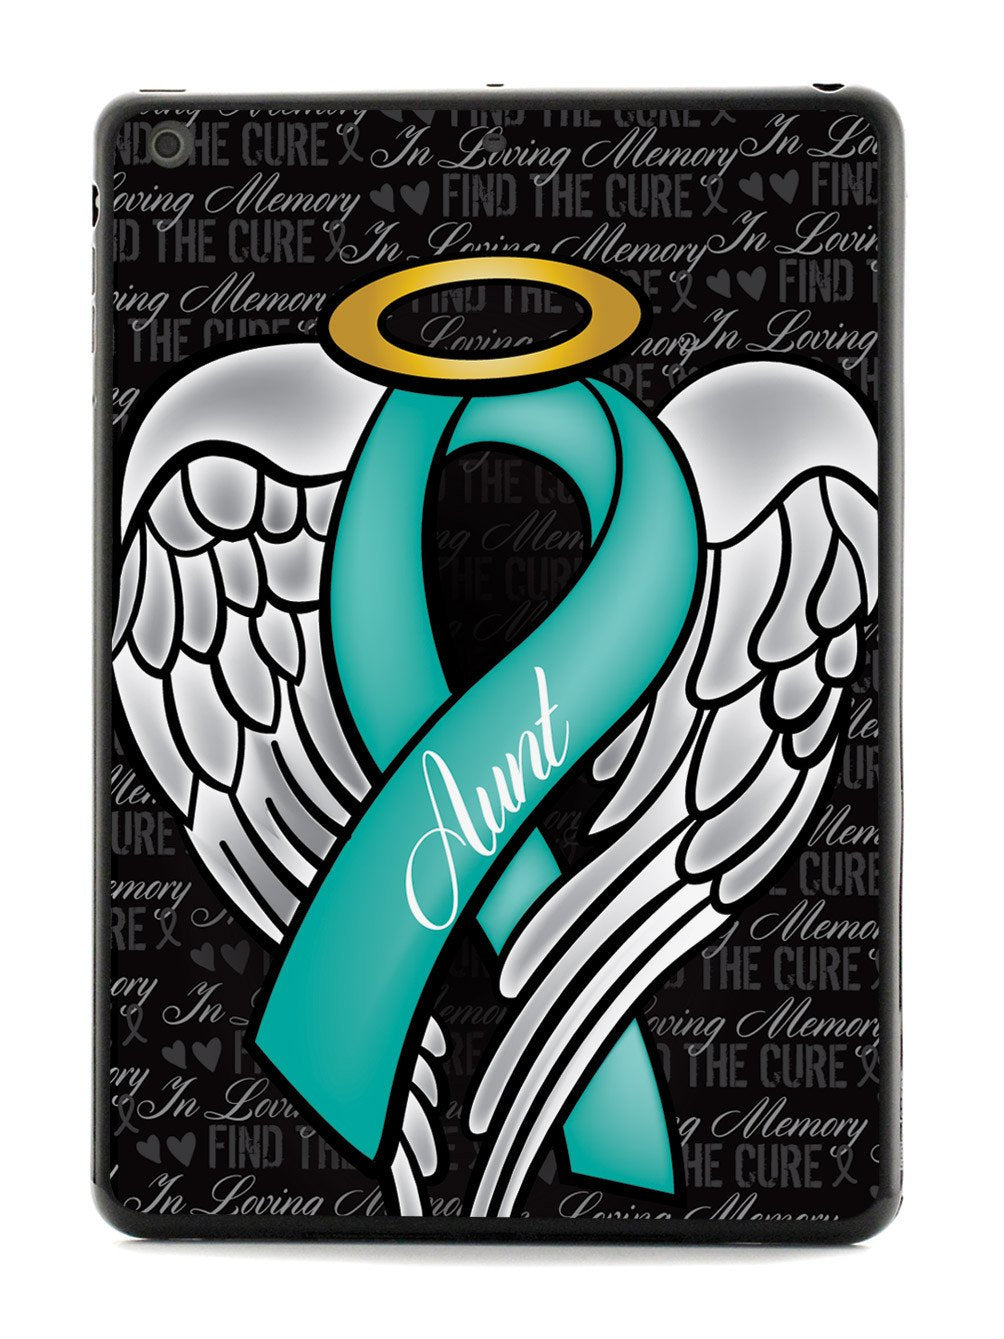 In Loving Memory of My Aunt - Teal Ribbon Case